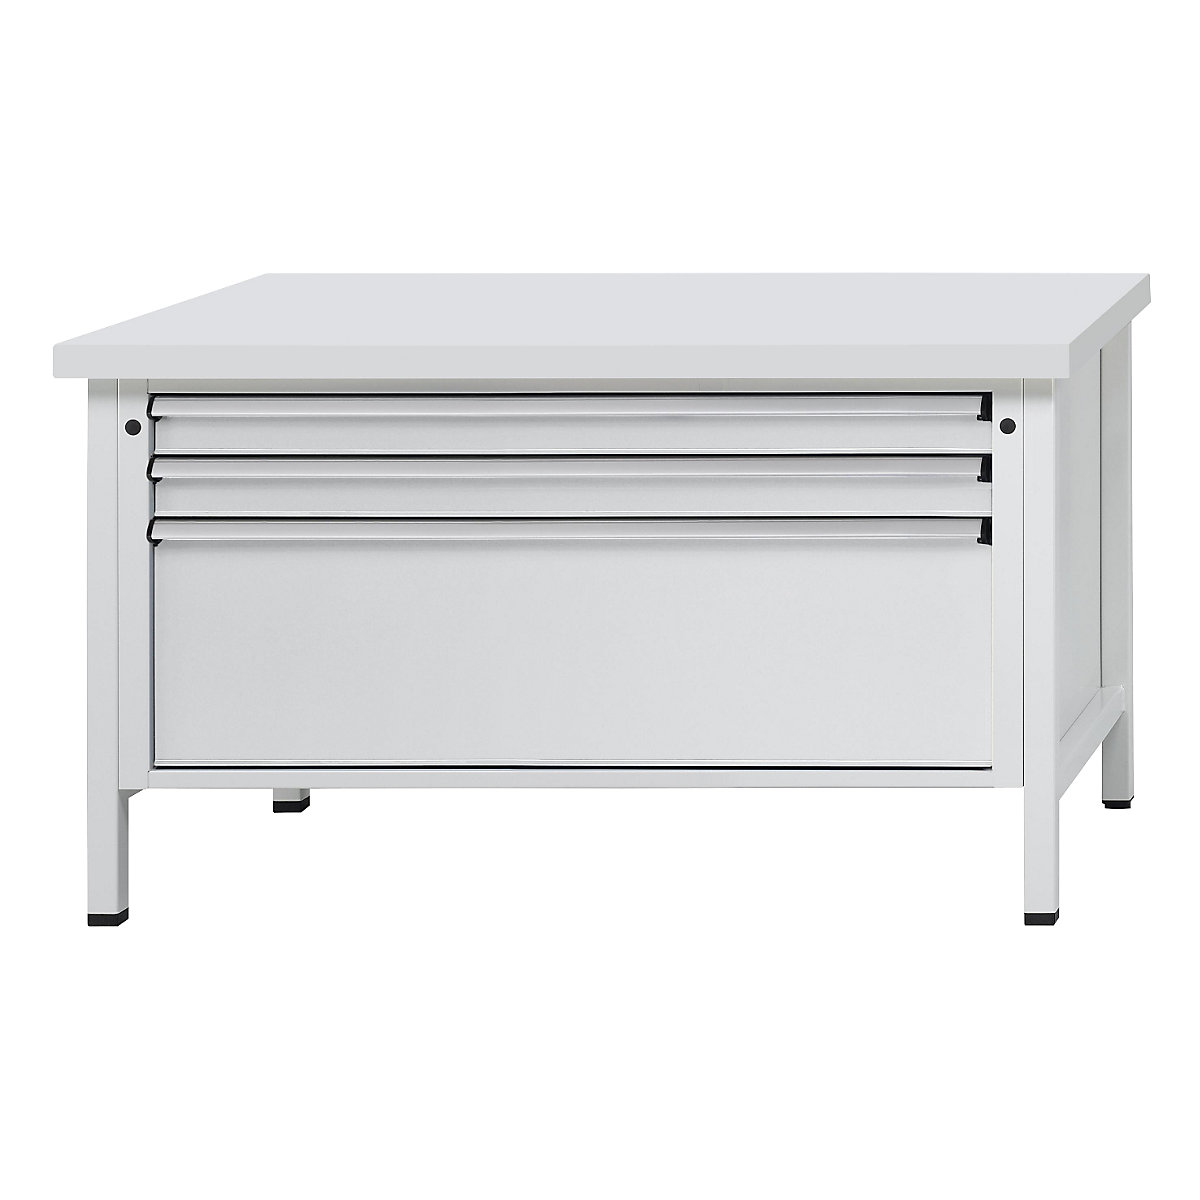 Workbench with XL/XXL drawers, frame construction – ANKE, width 1500 mm, 3 drawers, universal worktop, front in light grey-12